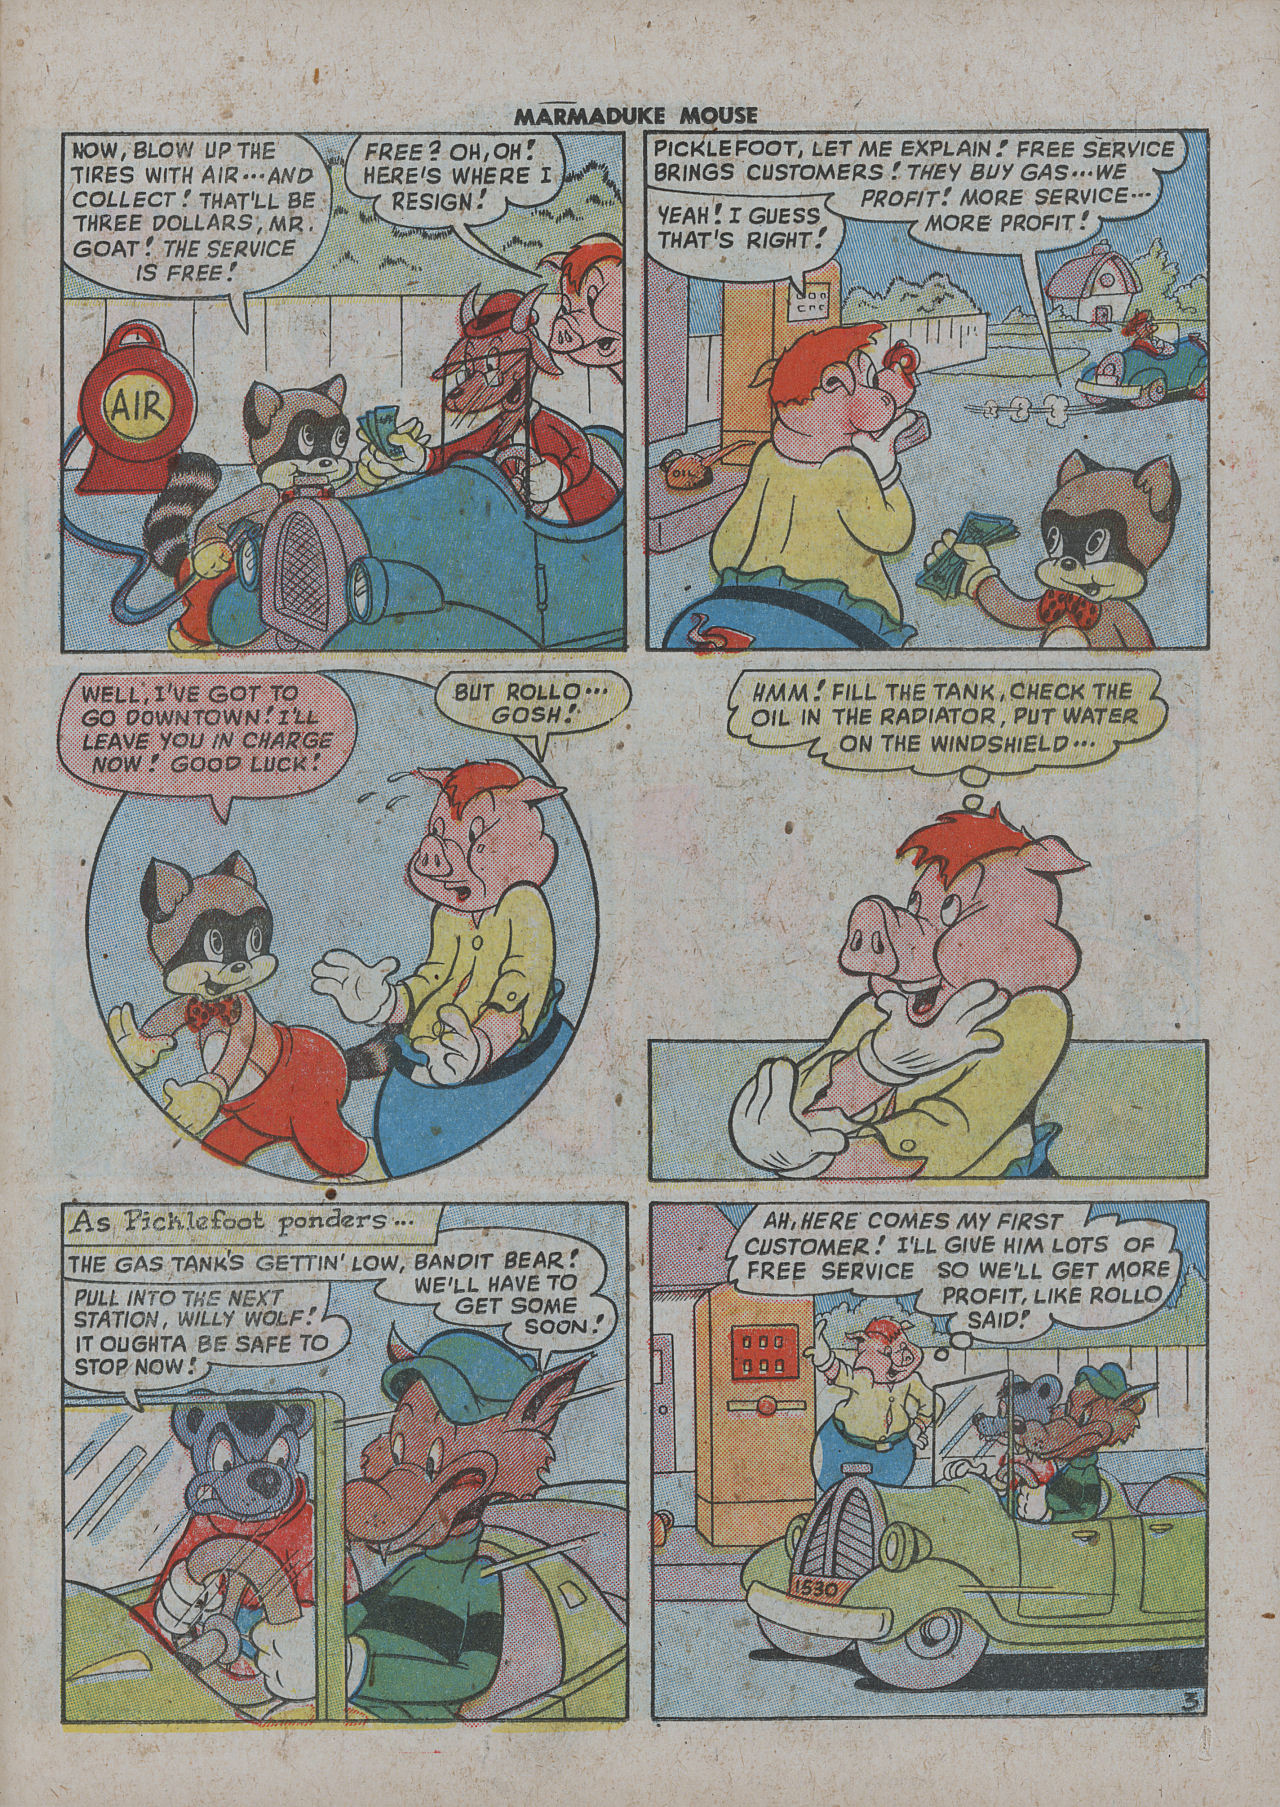 Read online Marmaduke Mouse comic -  Issue #14 - 23